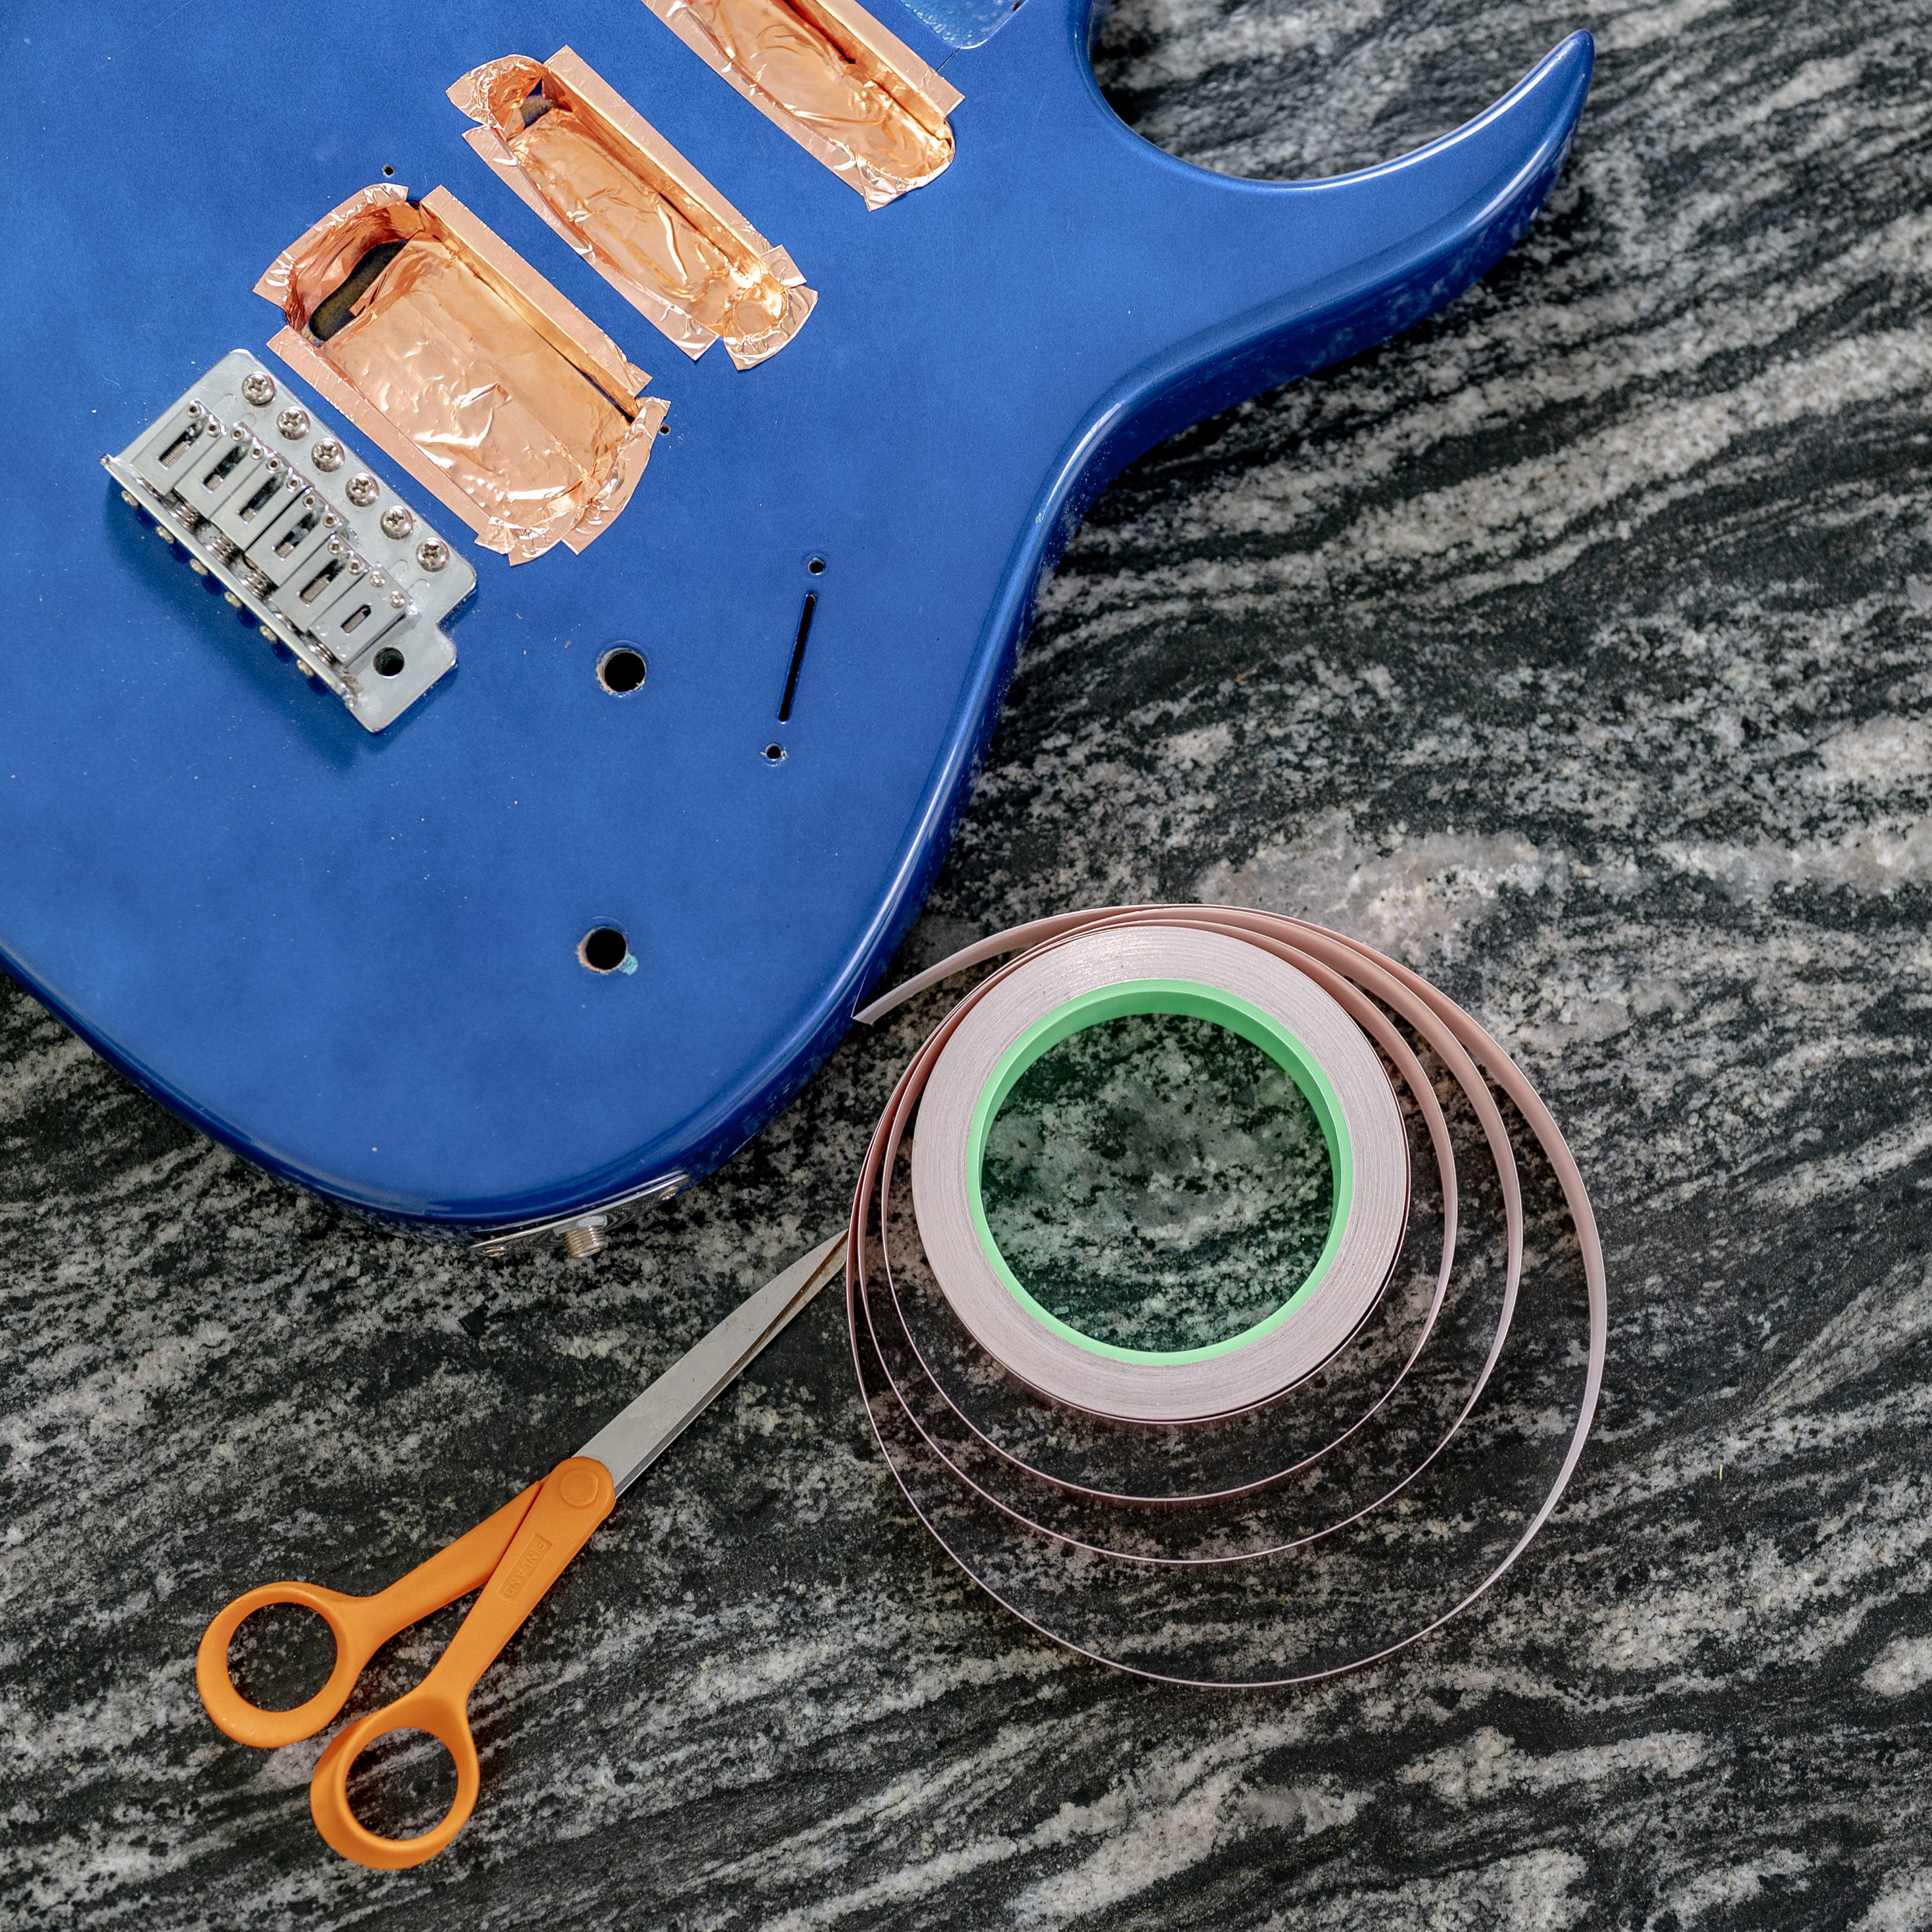 Kumprohu Copper Tape for Soldering | Self Adhesive Conductive Tape,Wire  Harness Wrap, Shielding Tape with Double-Sided Conductive, Fabric Tape for